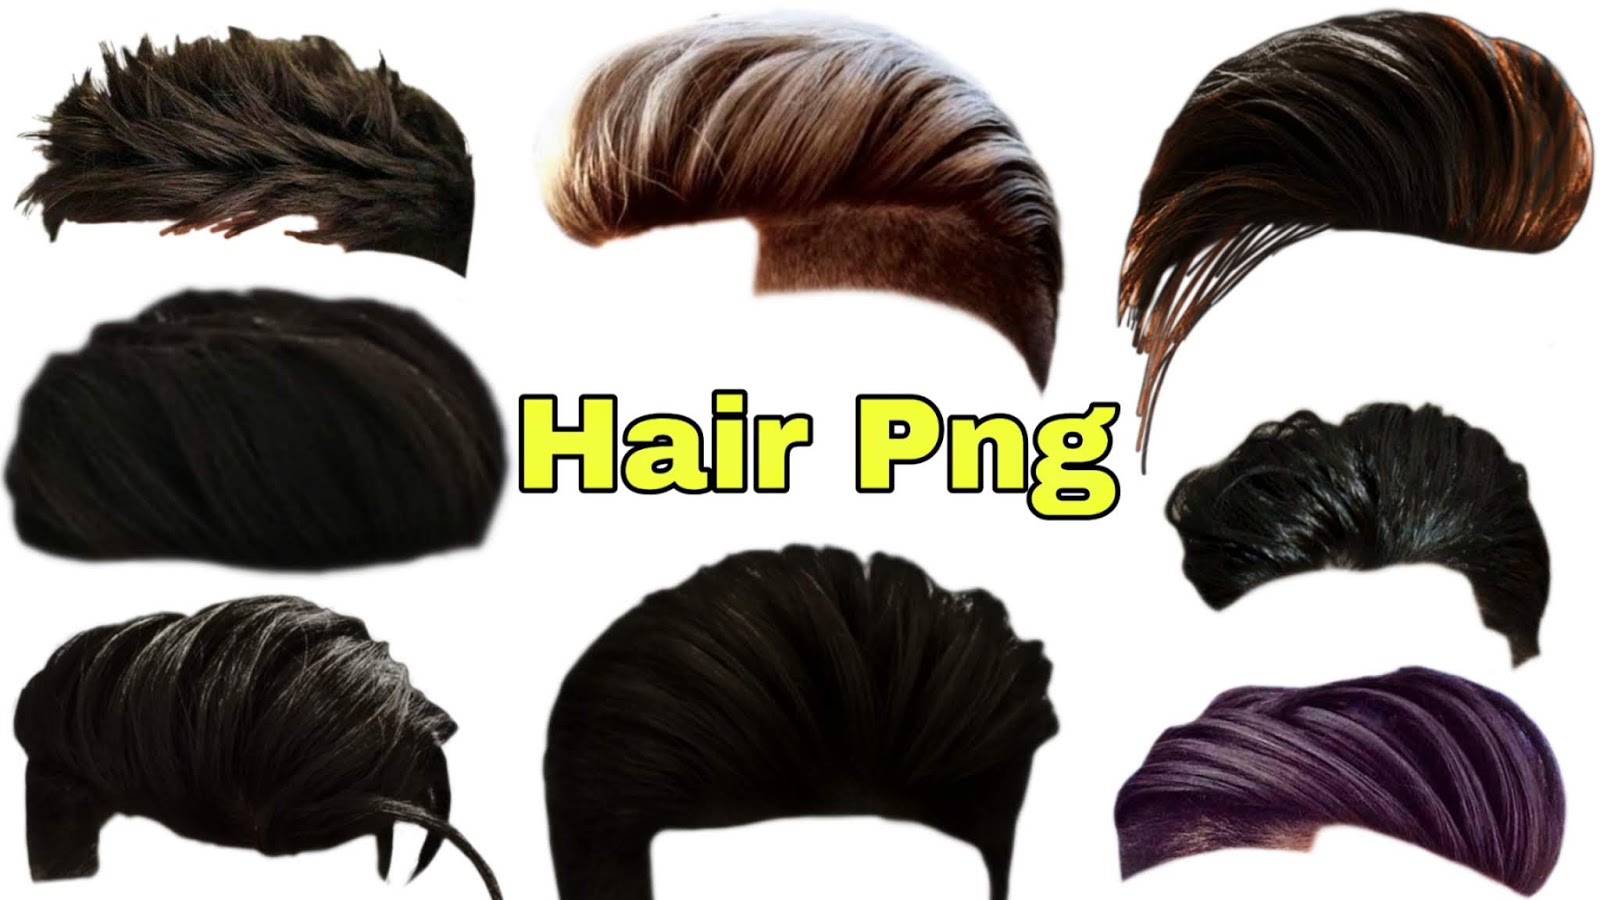 10 Best Hair png images | Hair png, Download hair, Picsart background